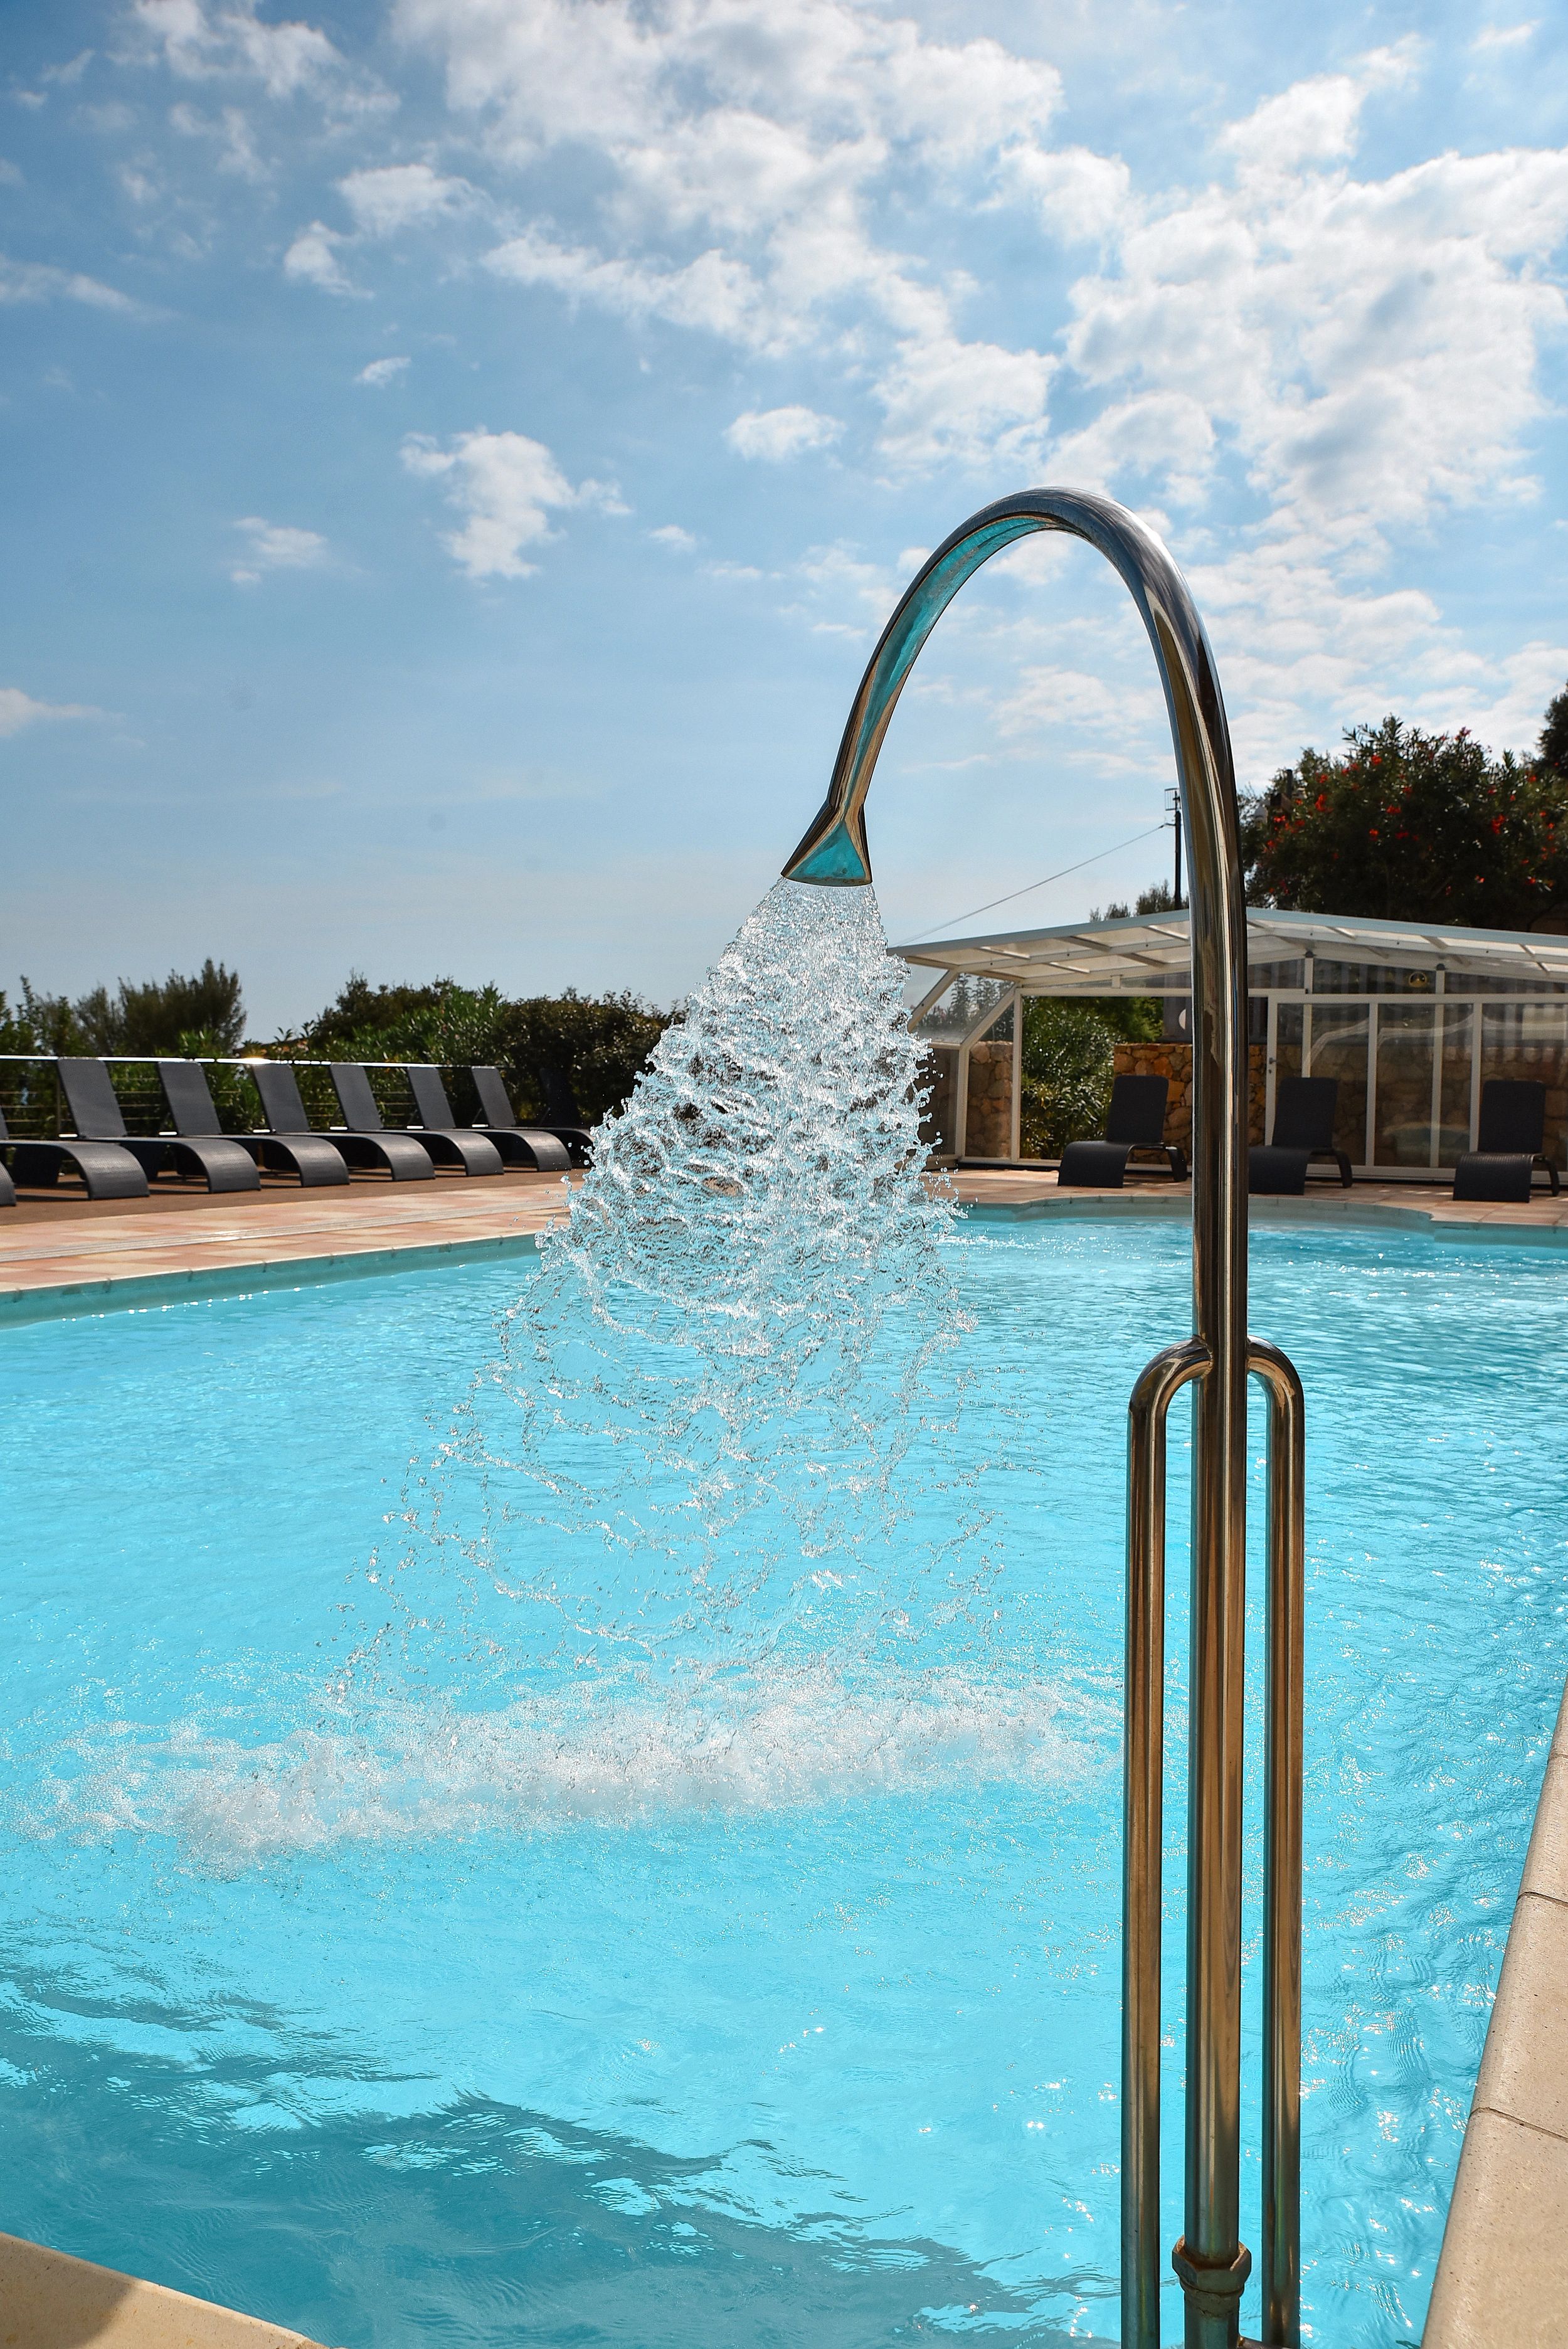 The heated pool of the 4-star residence in Porto-Vecchio